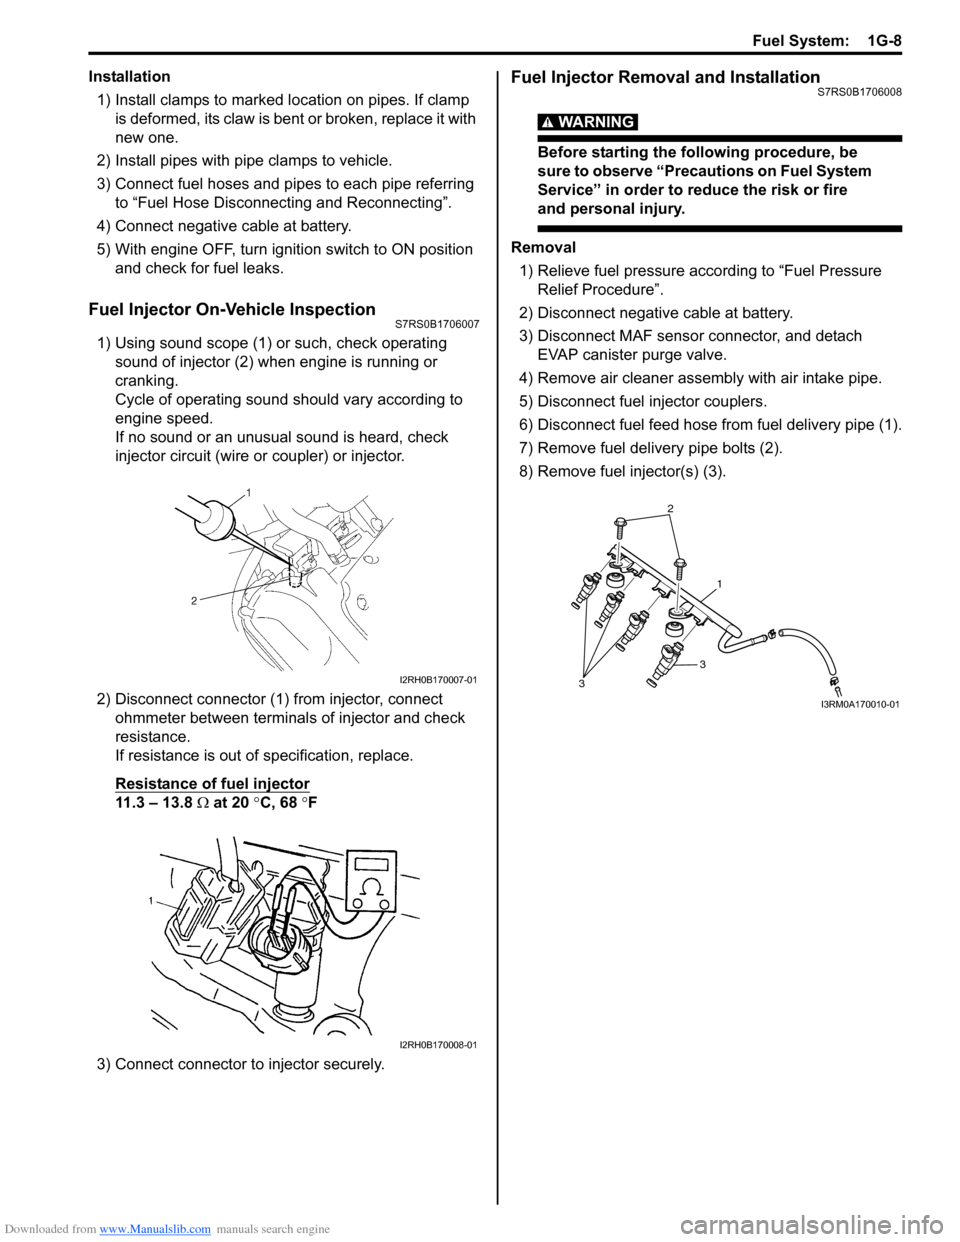 SUZUKI SWIFT 2004 2.G Service Workshop Manual Downloaded from www.Manualslib.com manuals search engine Fuel System:  1G-8
Installation1) Install clamps to marked location on pipes. If clamp  is deformed, its claw is bent  or broken, replace it wi